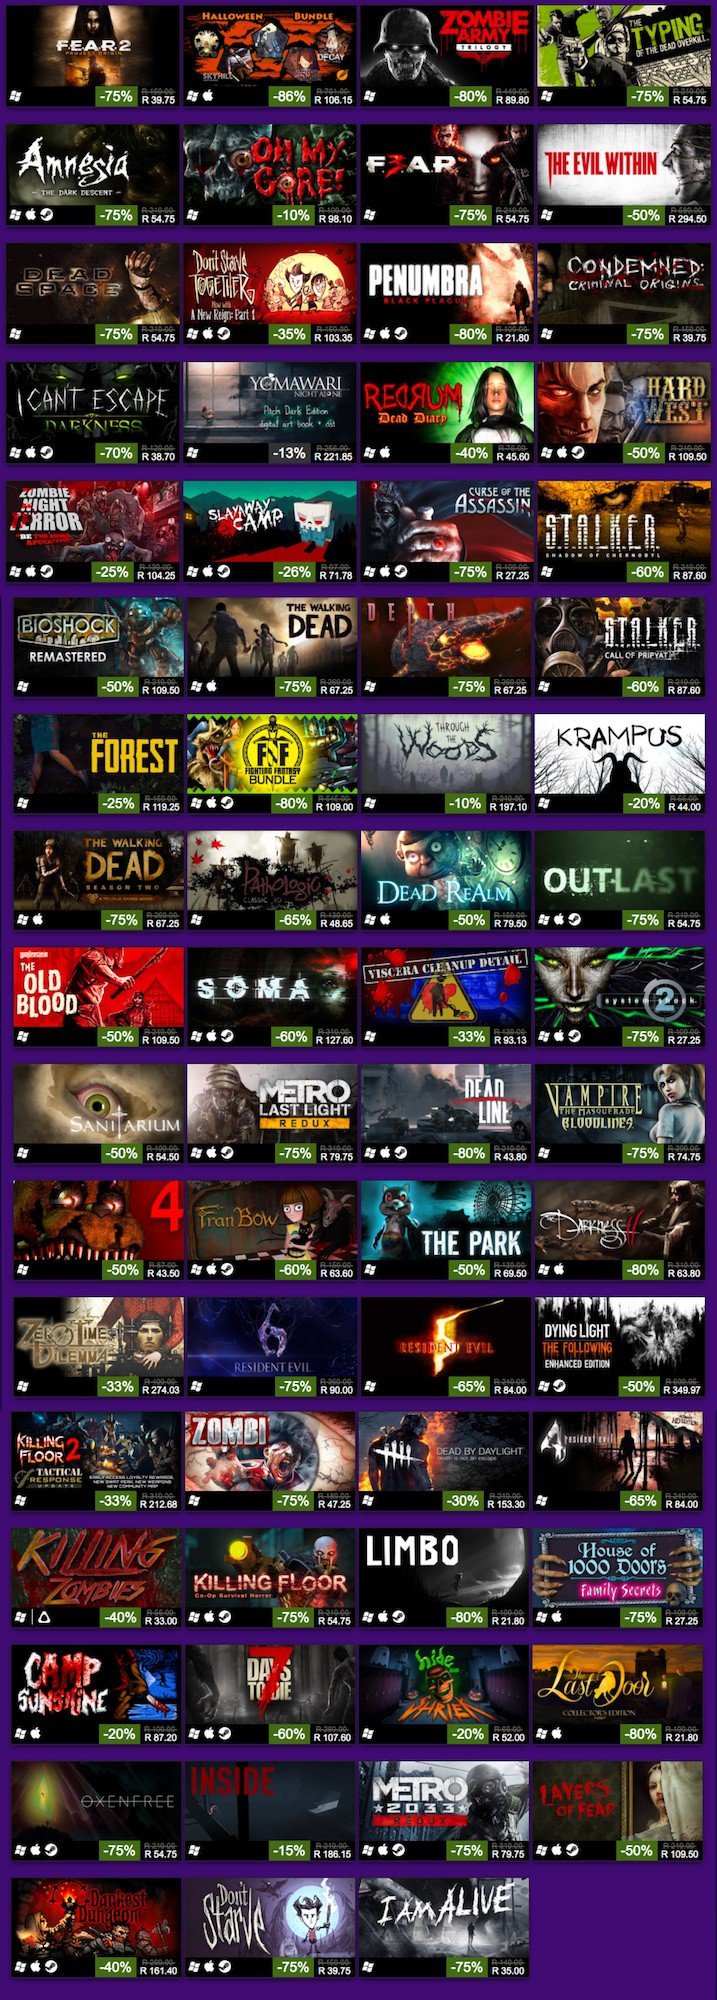 vamers-fyi-gaming-steam-halloween-sale-has-spooky-gaming-deals-limited-time-banner-01